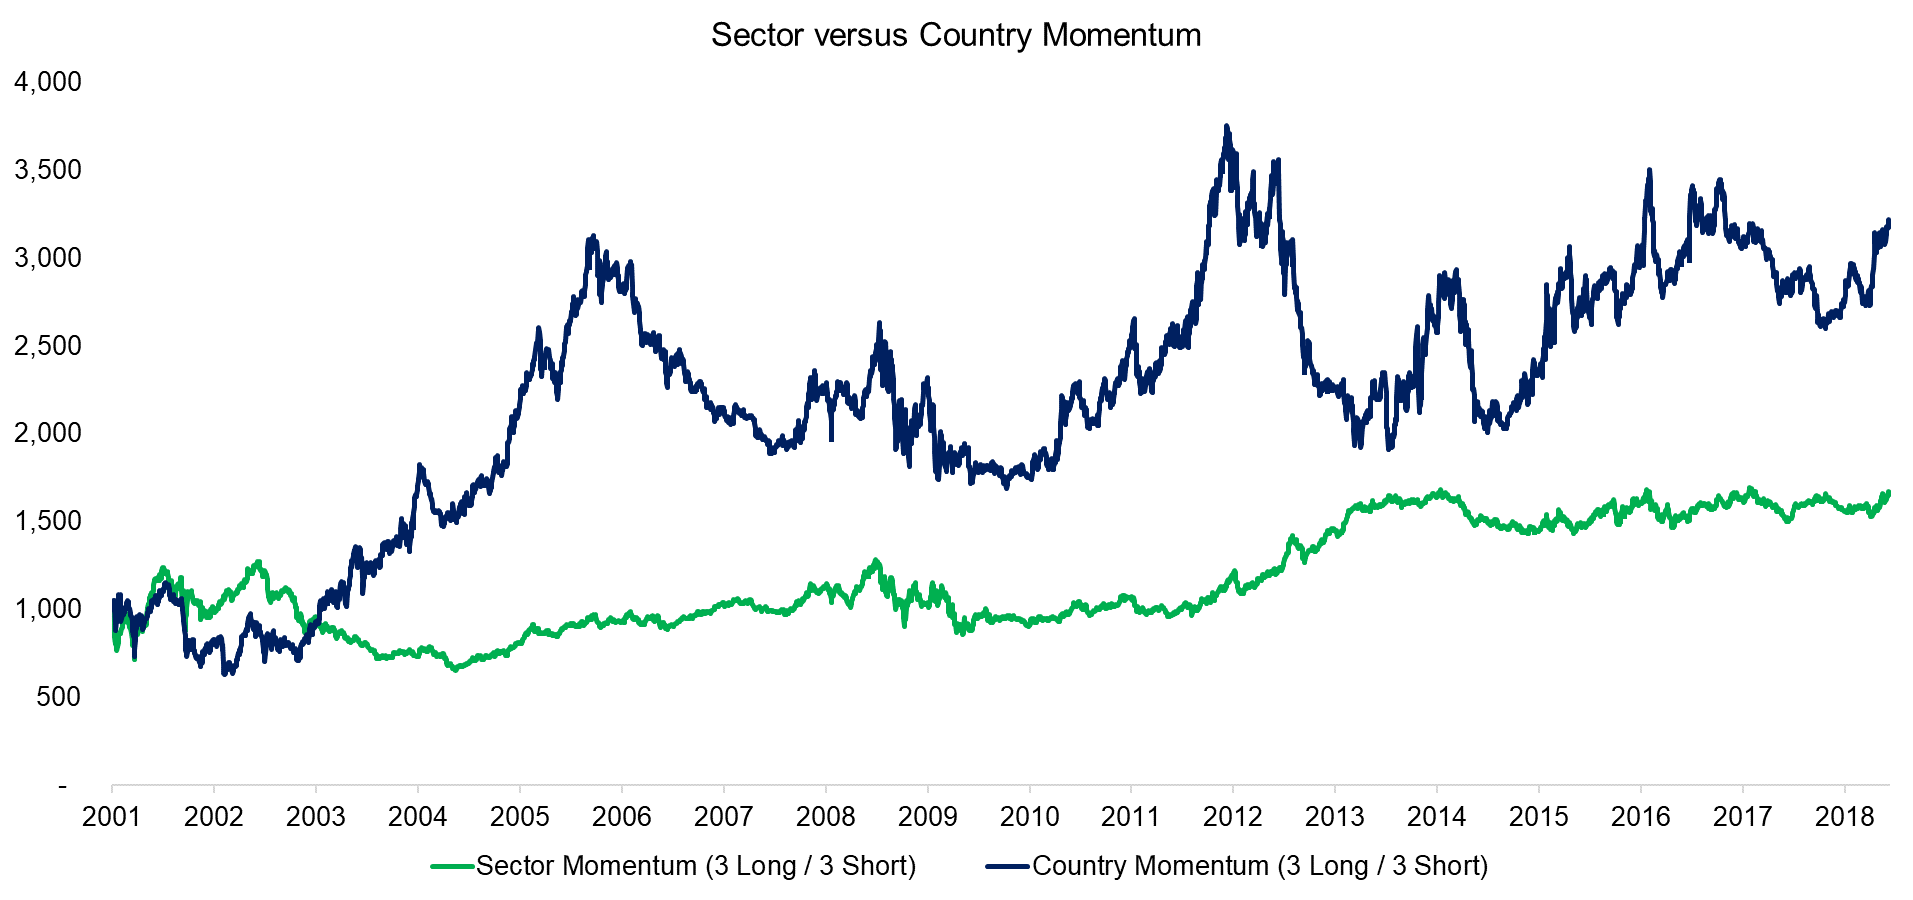 Sector versus Country Momentum